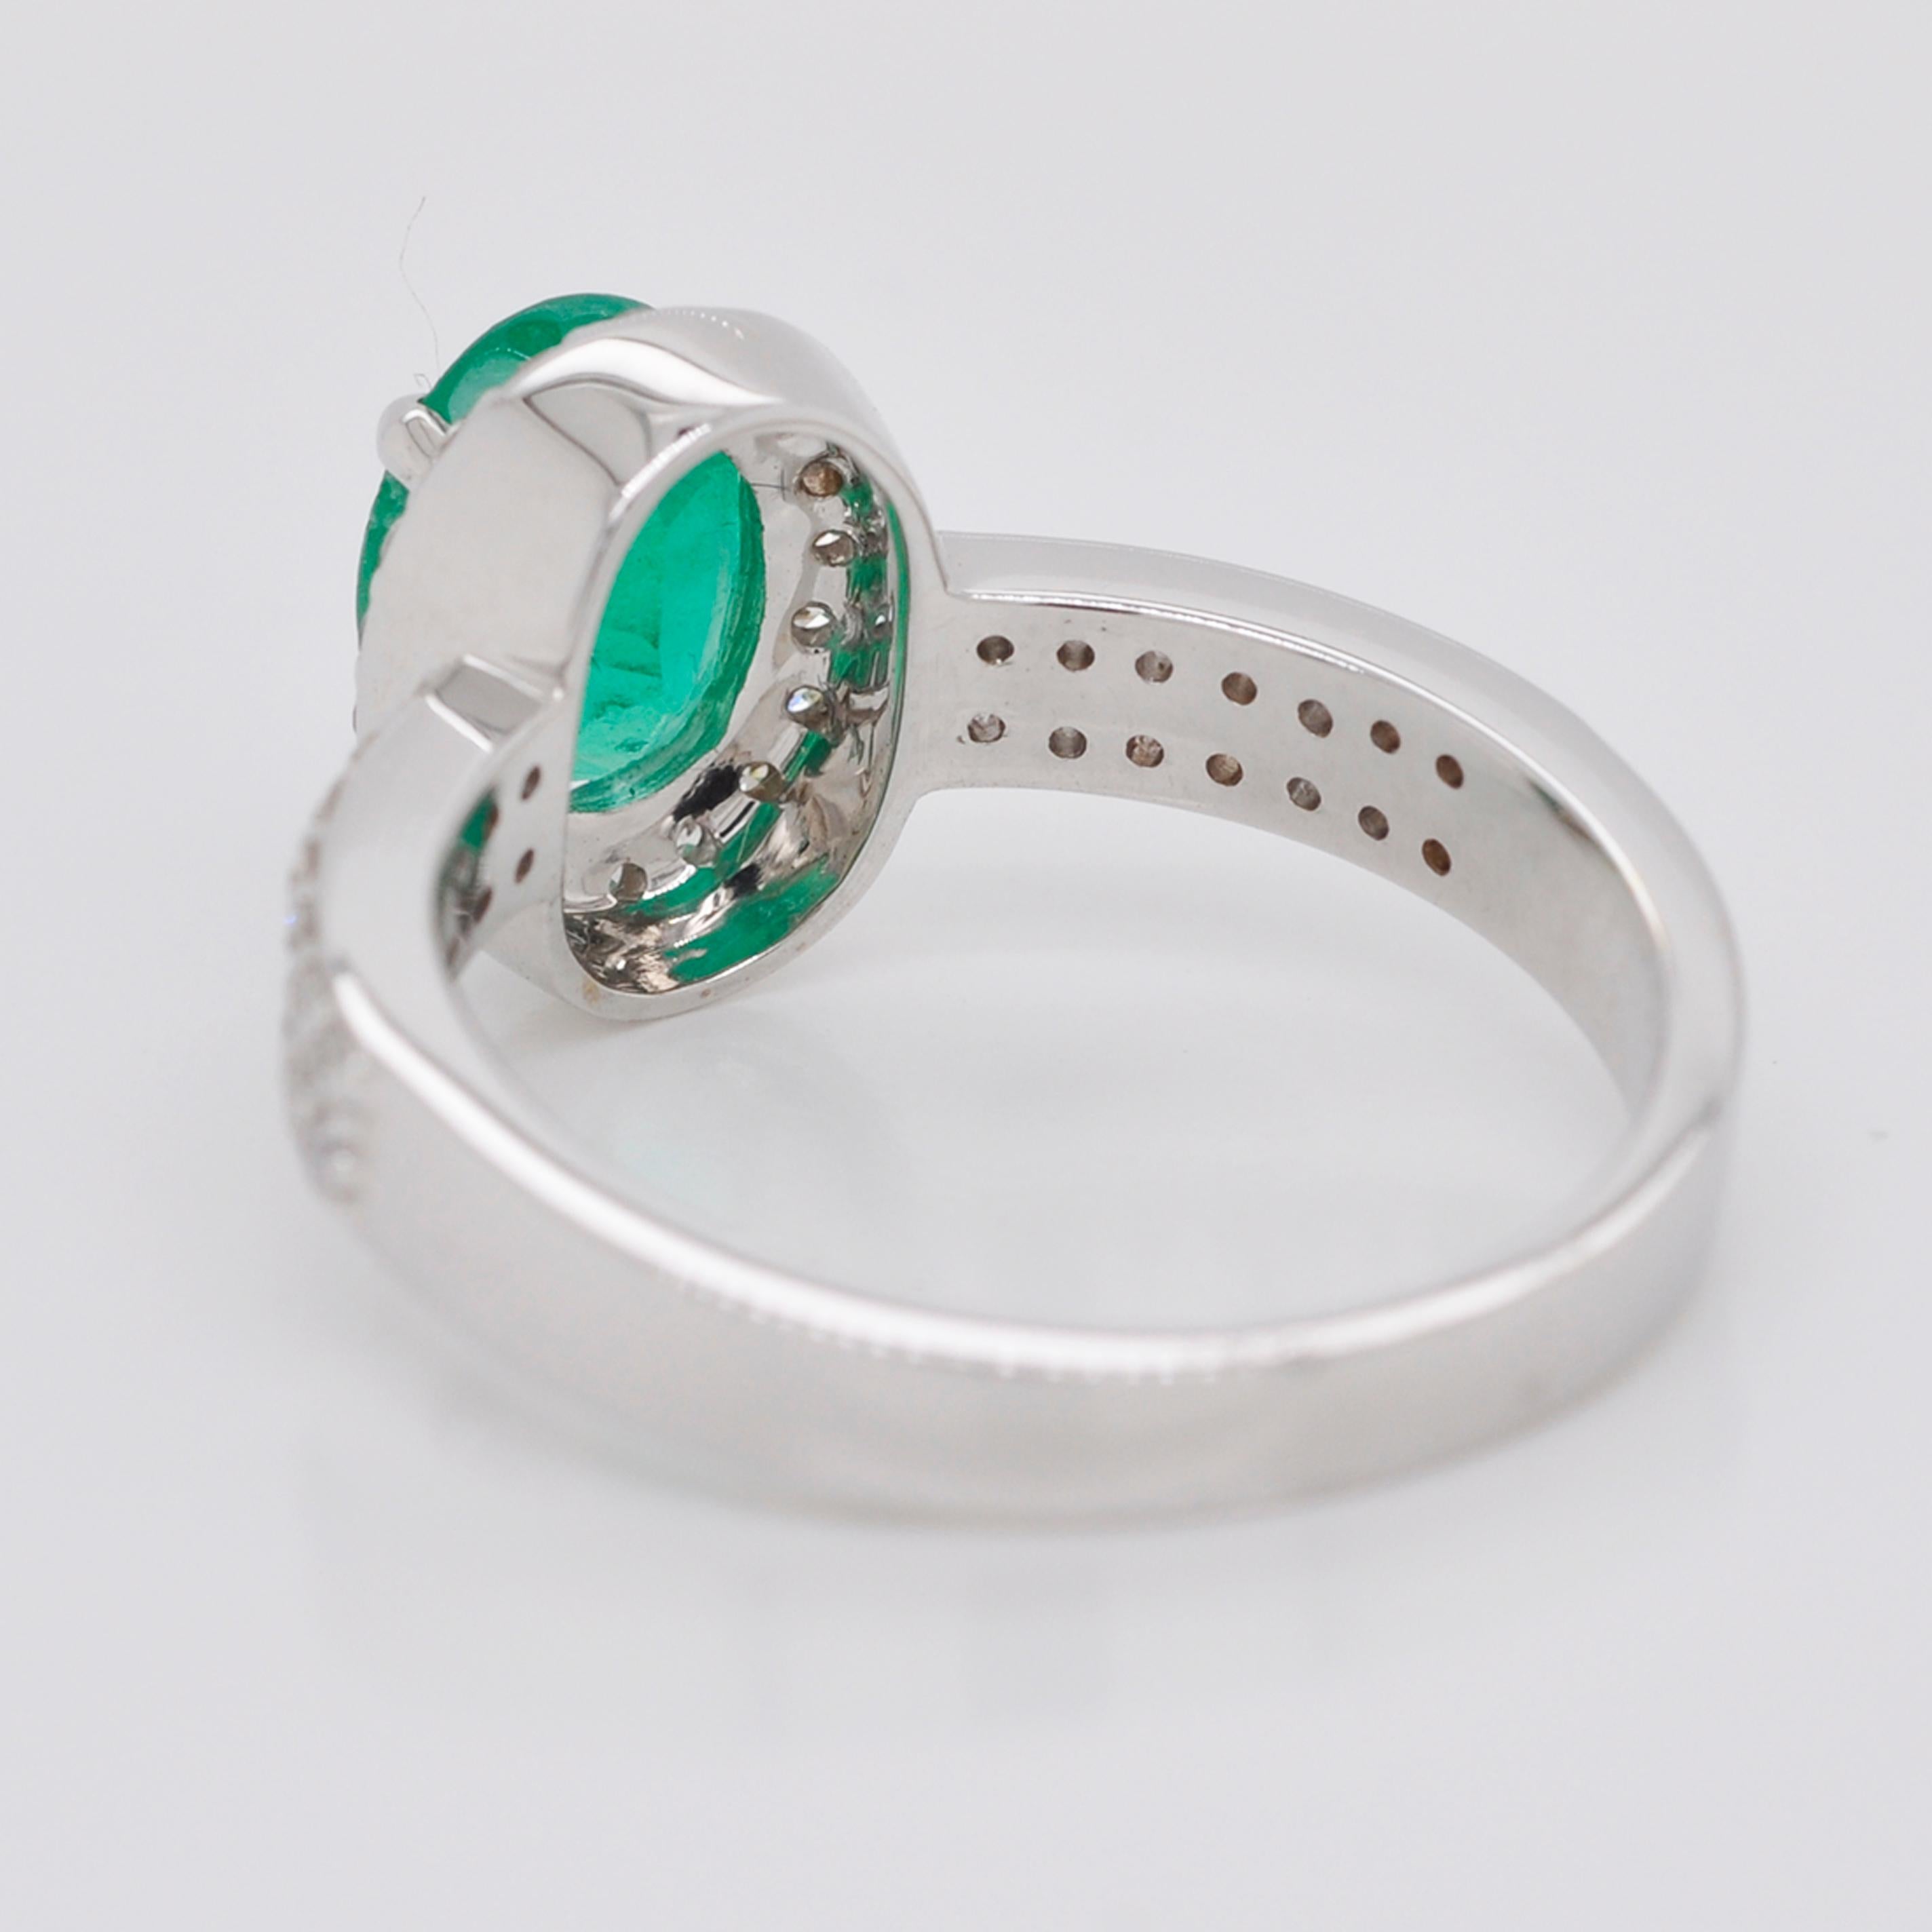 18 Karat White Gold 8.4x6.4 mm Oval Colombian Emerald Diamond Contemporary Ring For Sale 10